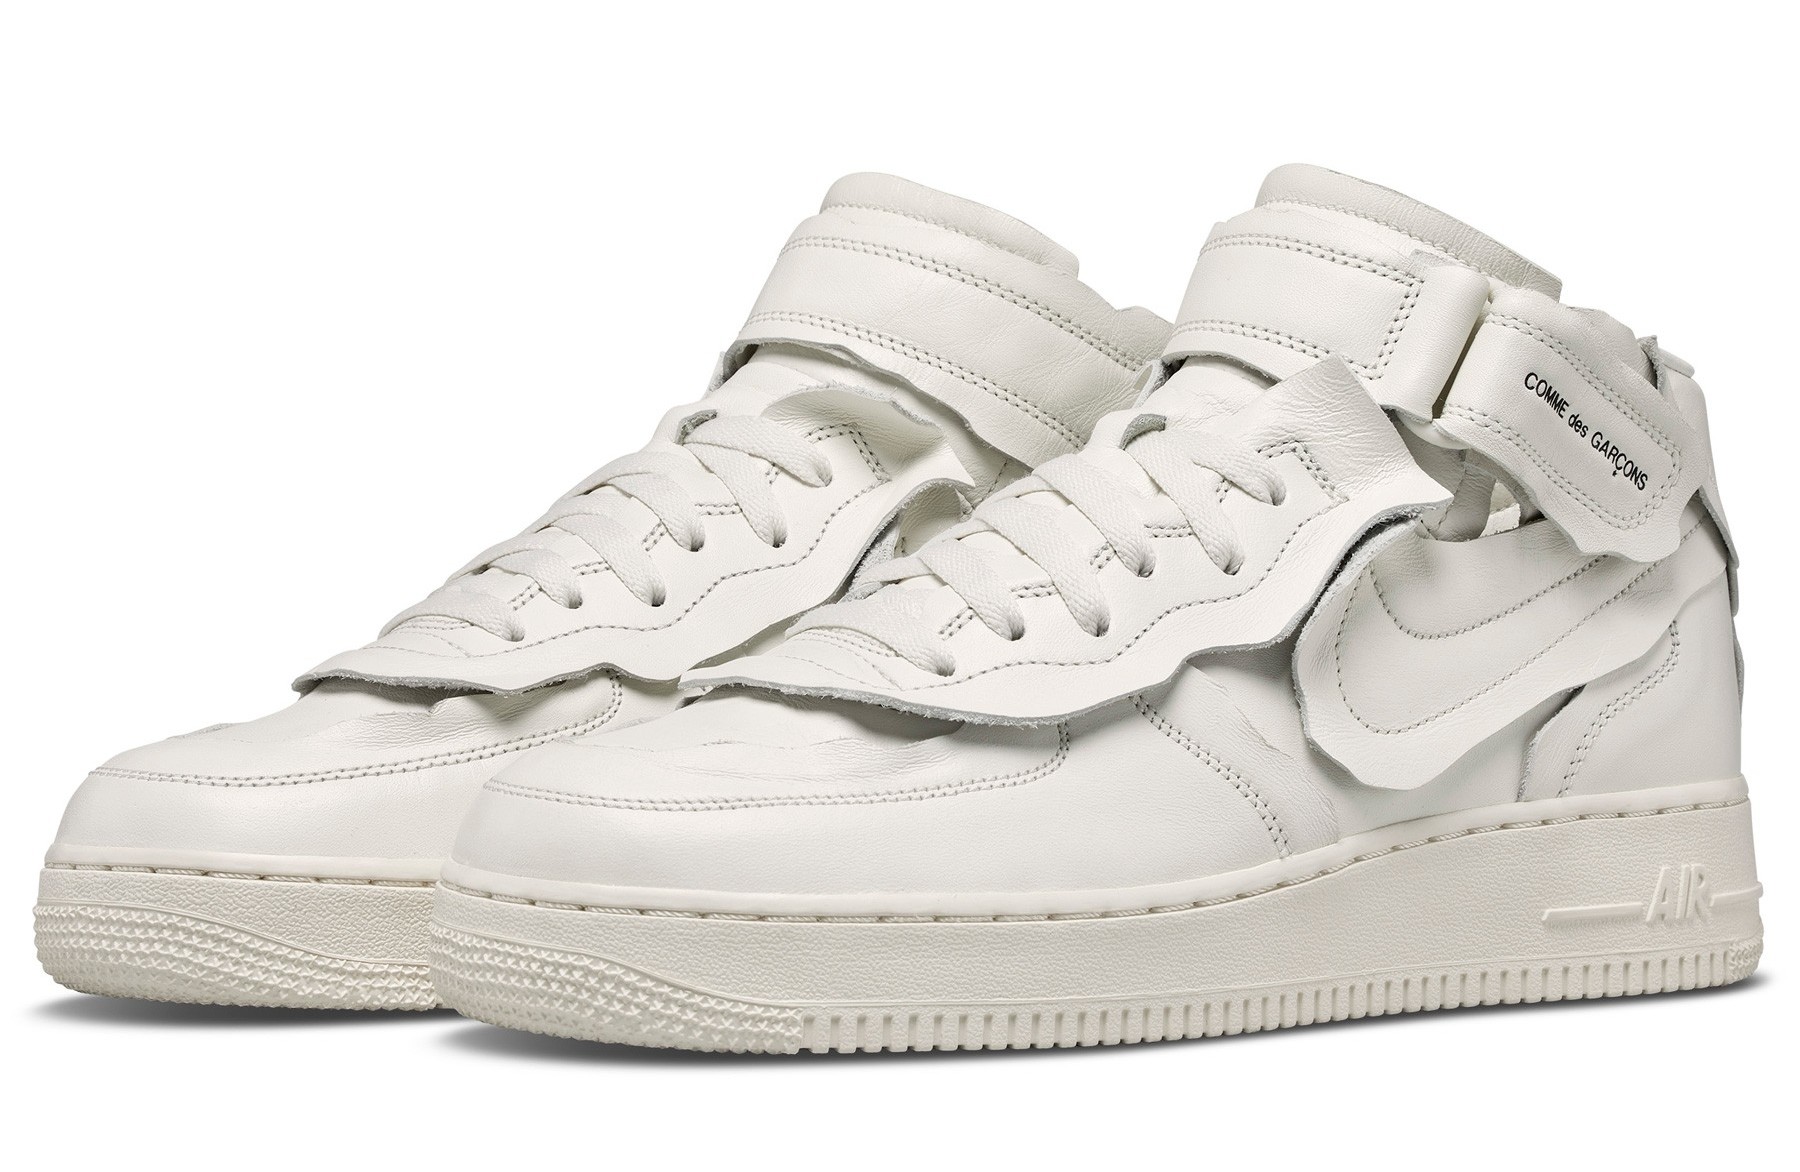 Comme des Garcons' Nike Air Force 1 Mid Collabs Are